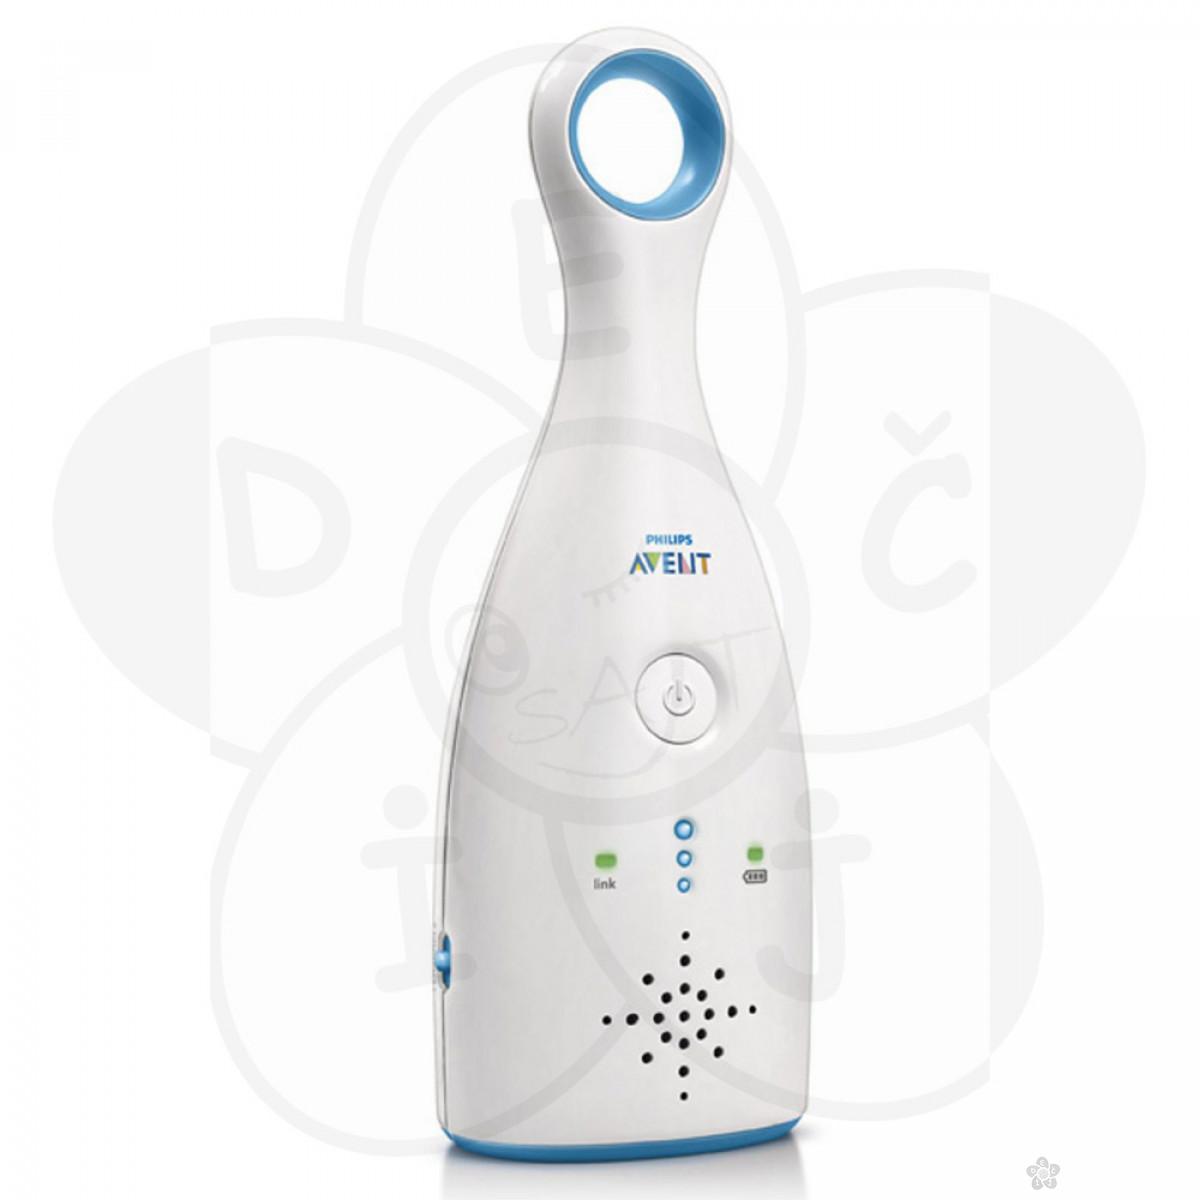 Avent analogni baby monitor 